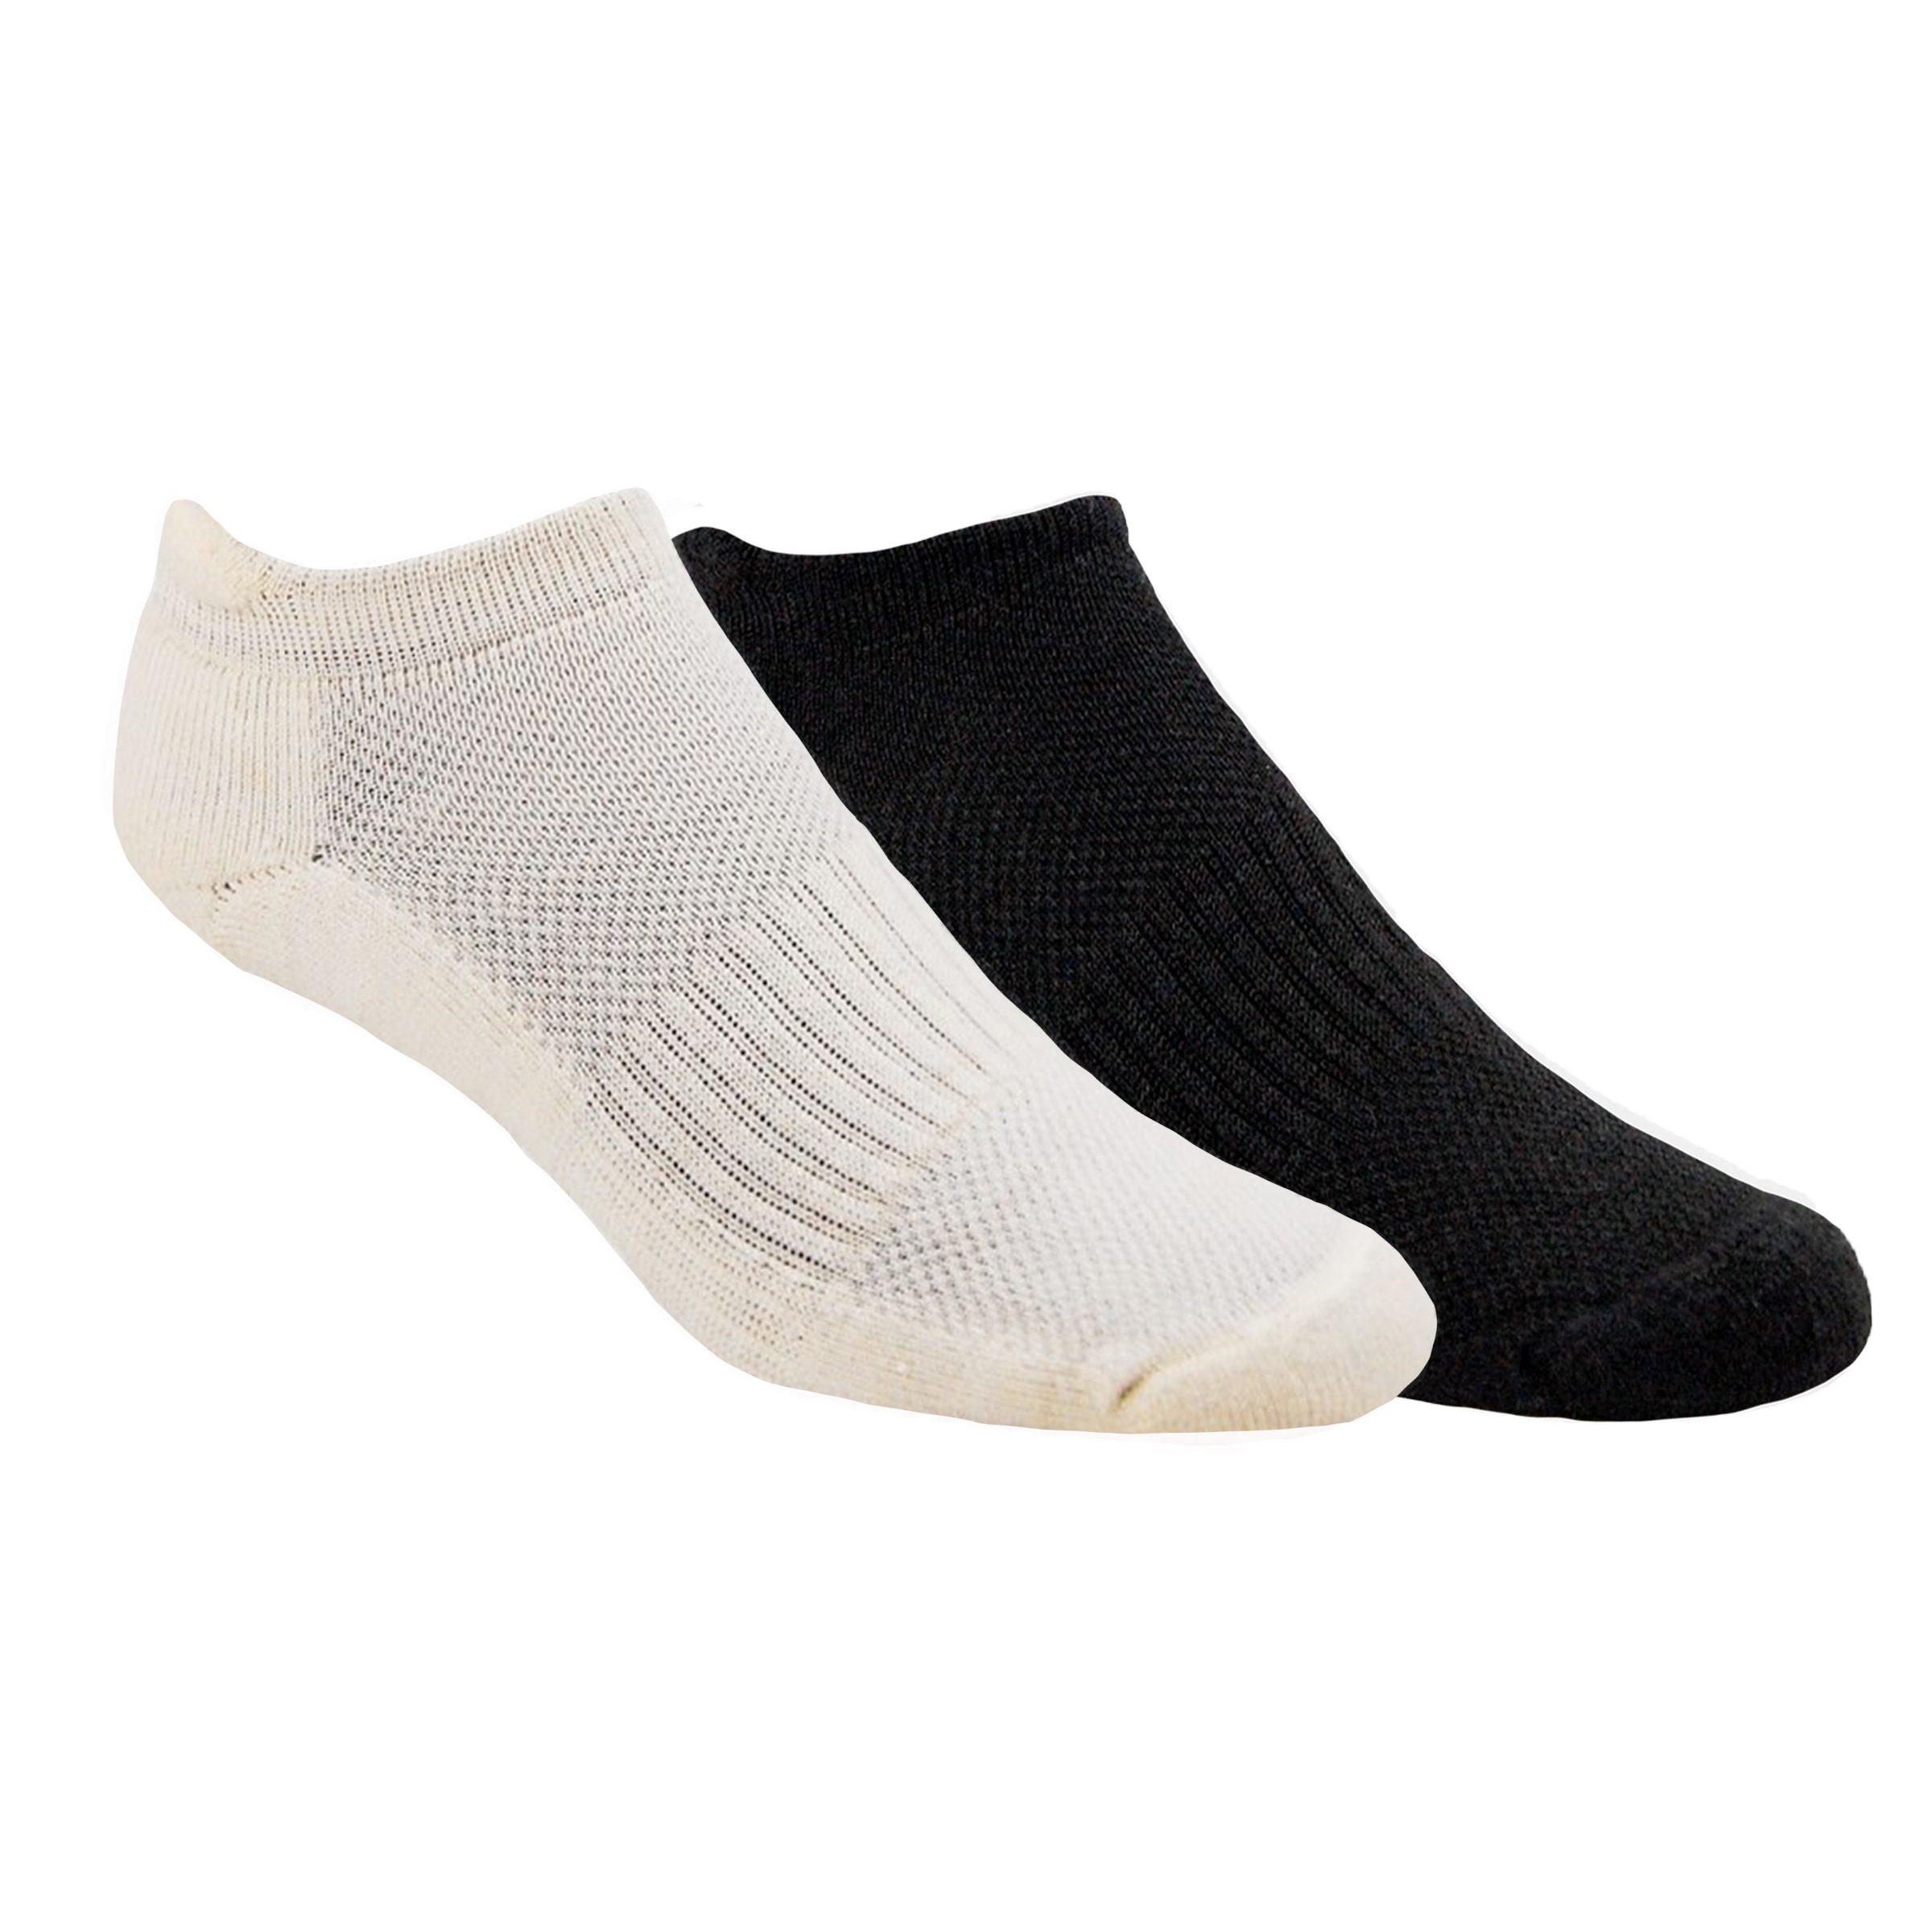 Alpaca Socks - Athletic Blend Slim Fit Breathable Ankle & Comfortable Sports With Tab For Men & Women